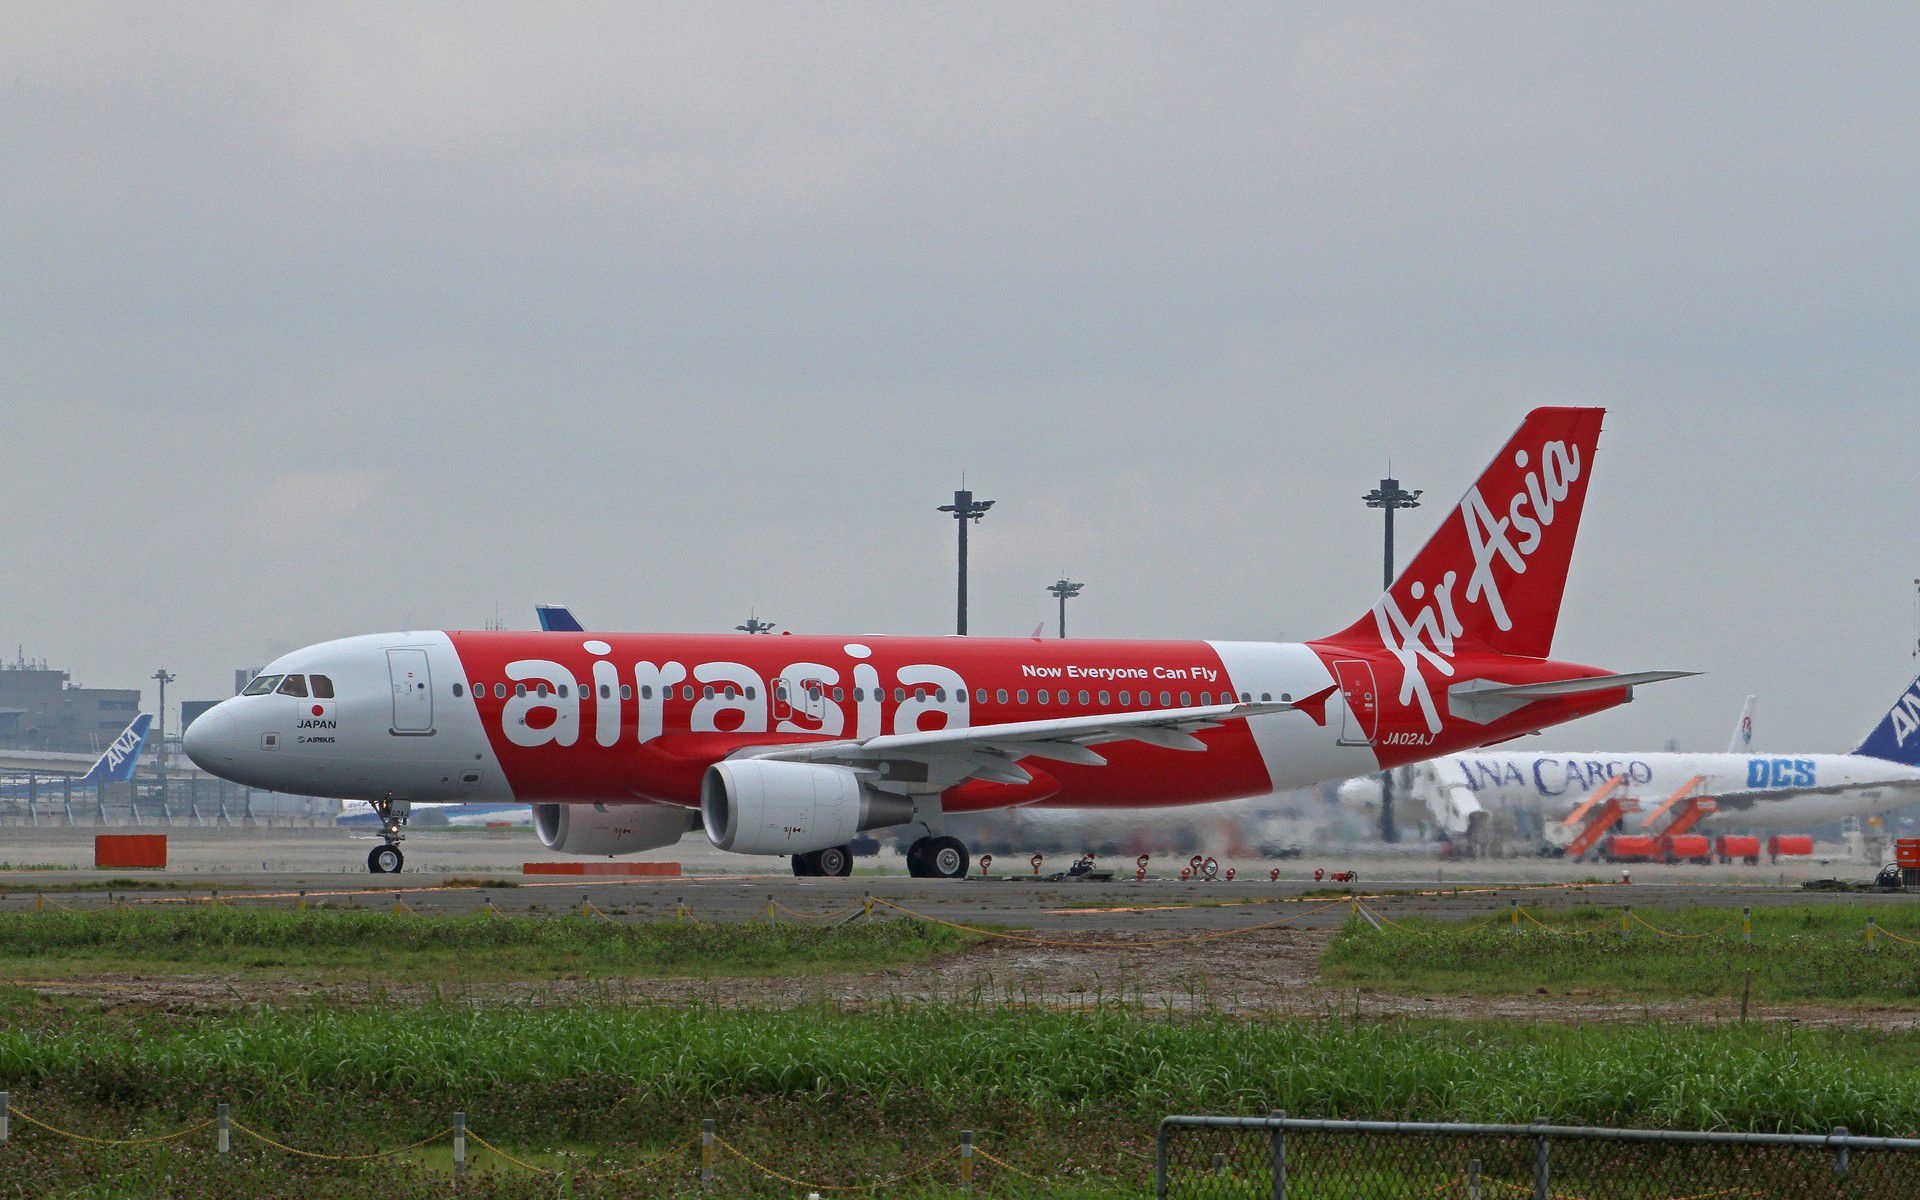 AirAsia, Top free backgrounds, Airline wallpapers, Asia travel experience, 1920x1200 HD Desktop